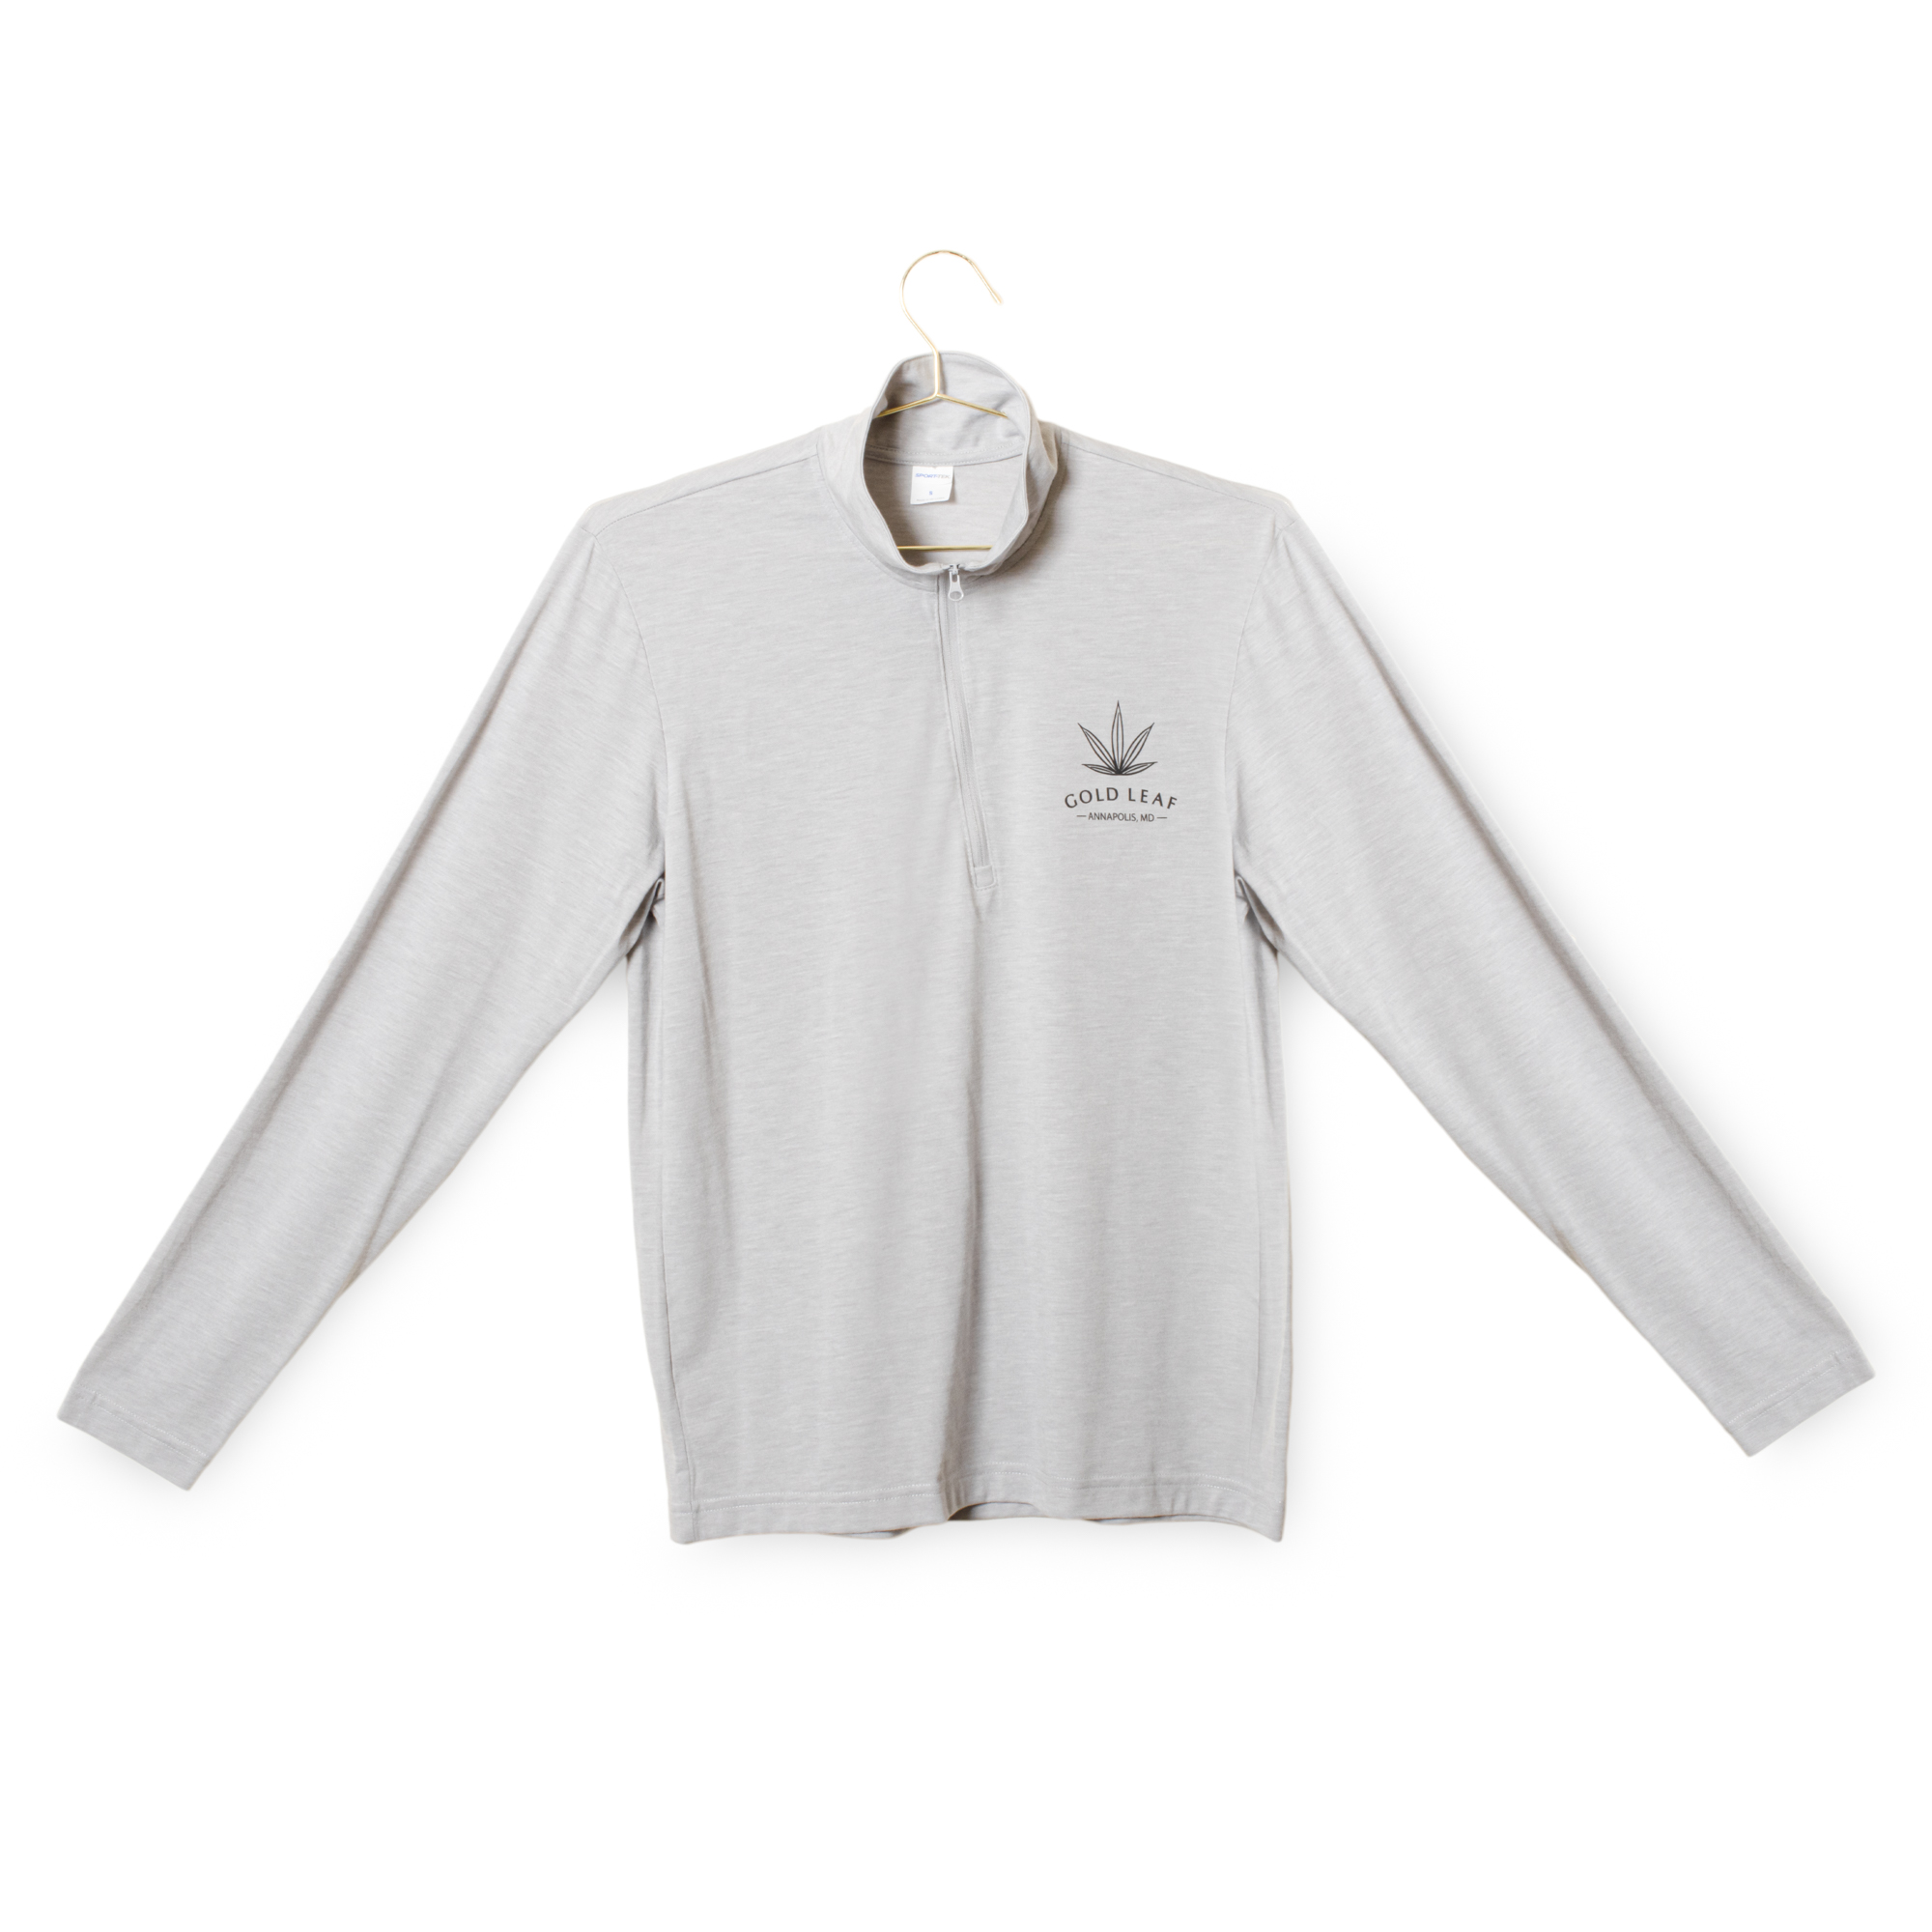 Gold Leaf - Clothing - Shirt With Zip - Grey (L) - Jane